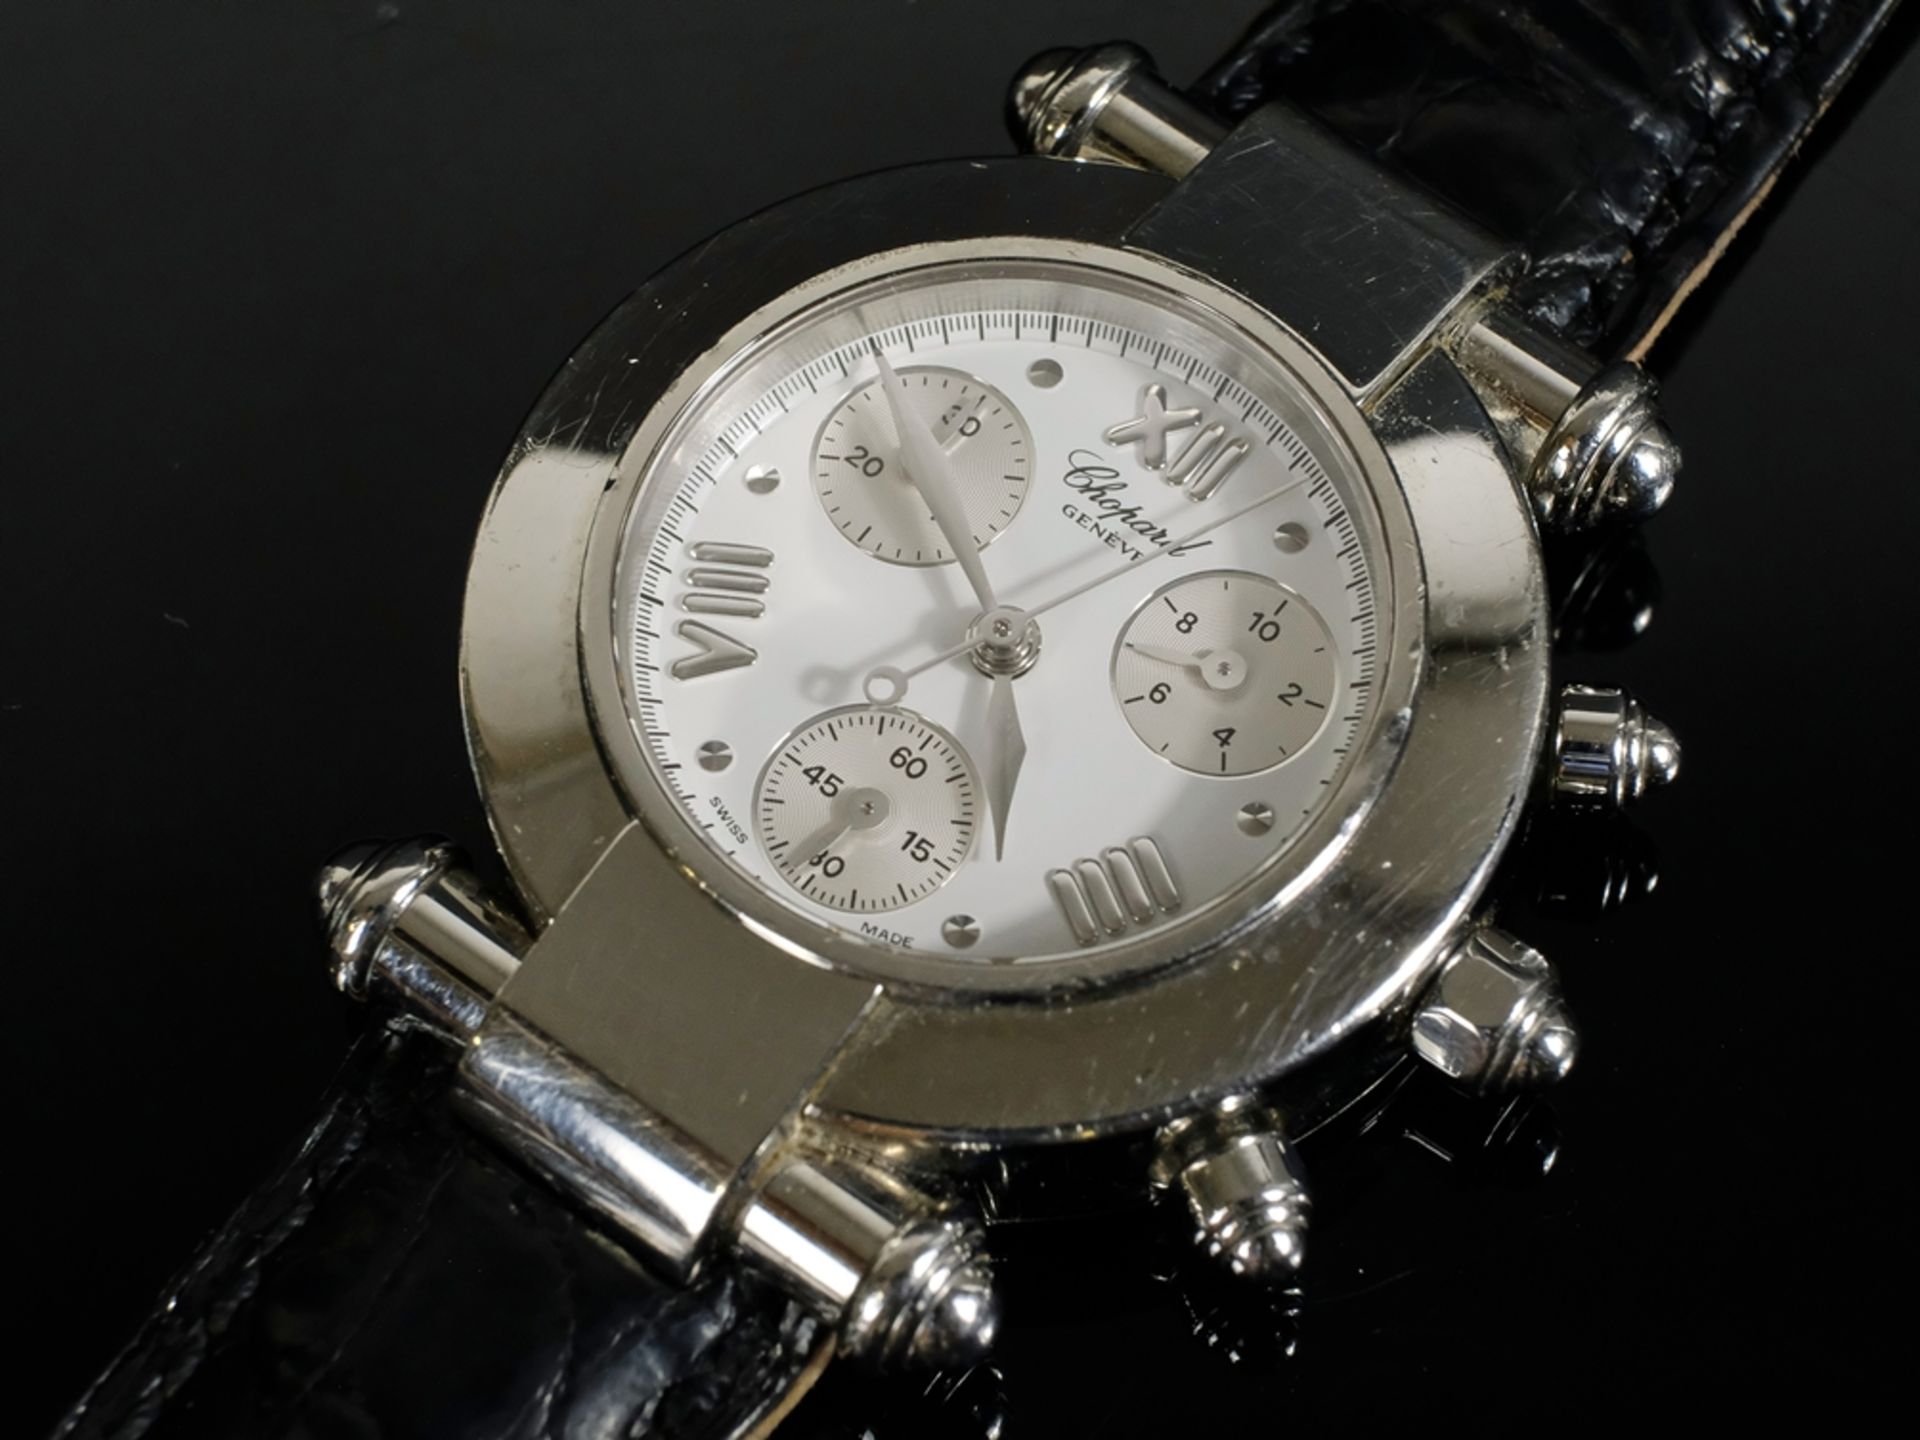 CHOPARD LADIES' WATCH "Imperiale Dau", white dial with Roman numerals at 12/4/7, silver hands, d 3.